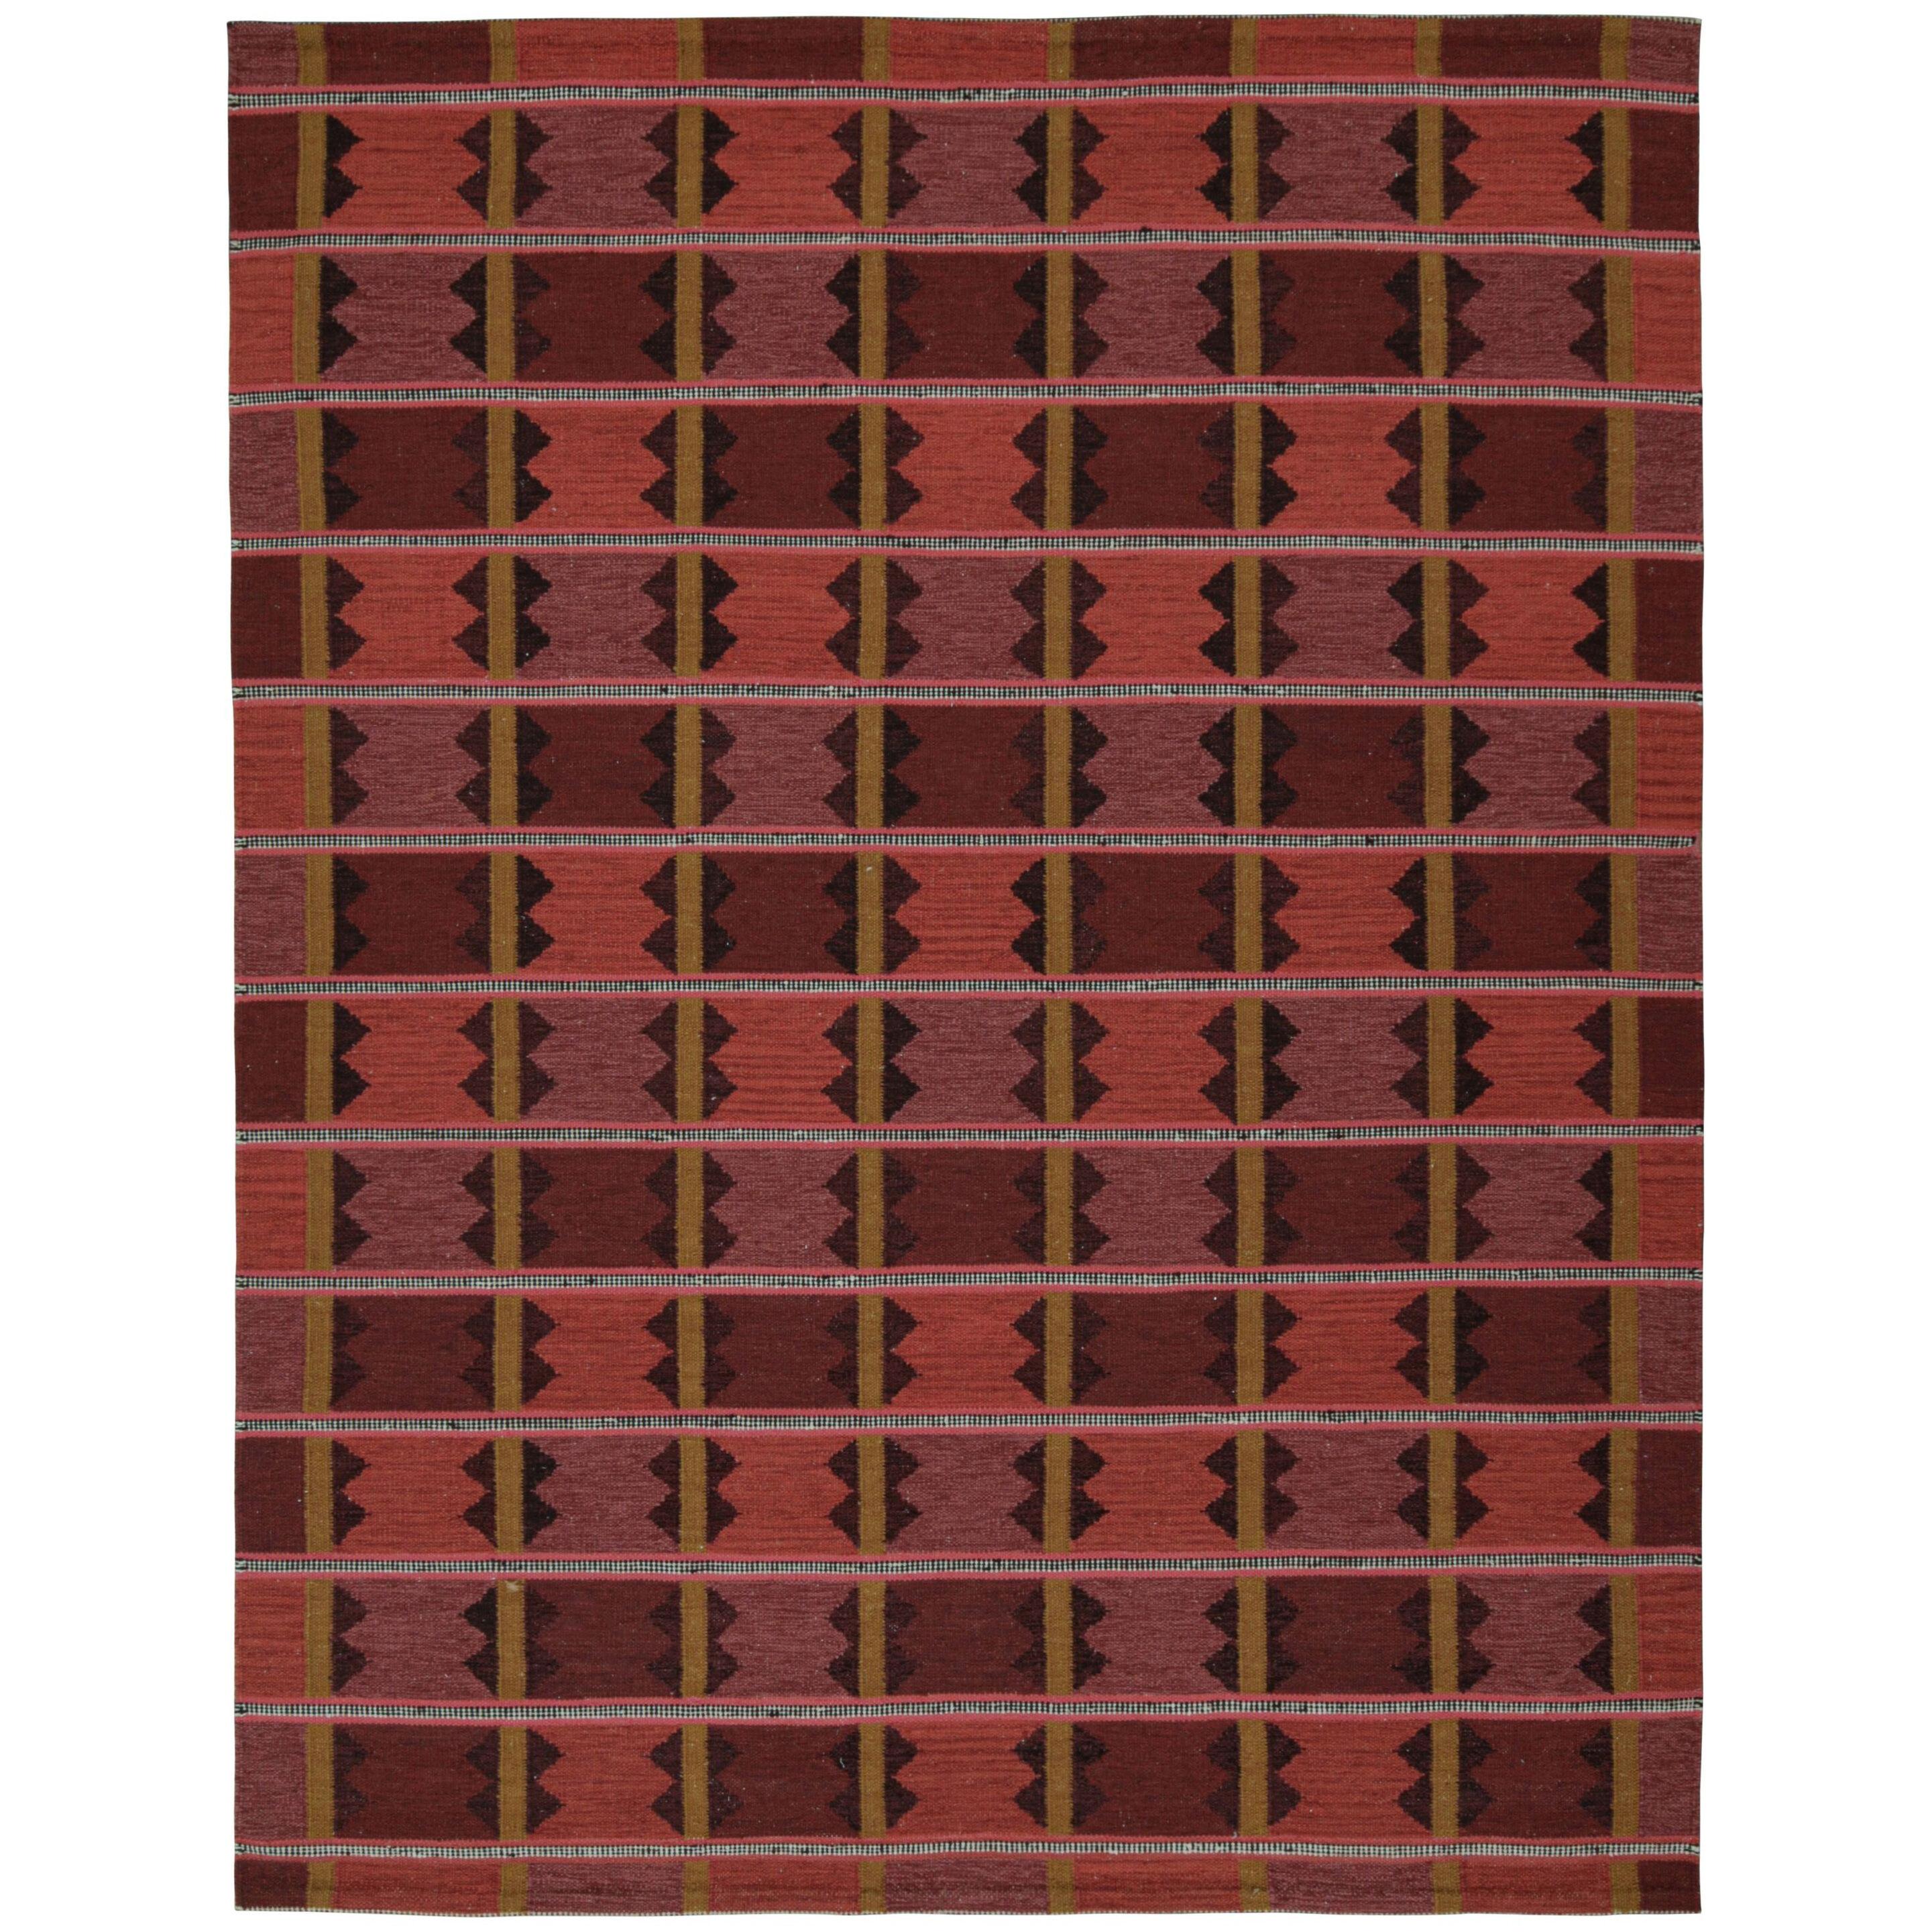 Rug & Kilim’s Scandinavian Style Kilim with Patterns in Tones of Red & Gold 